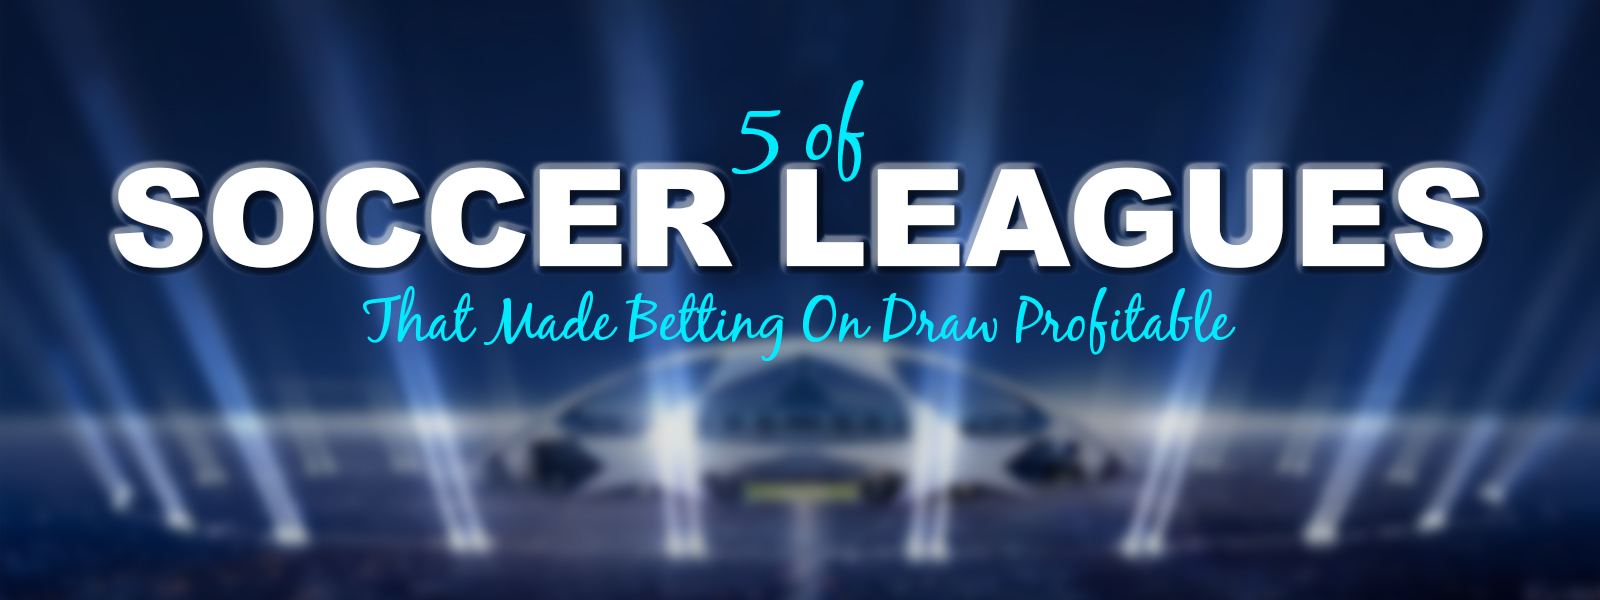 5 Soccer Leagues That Made Betting On Draw Profitable